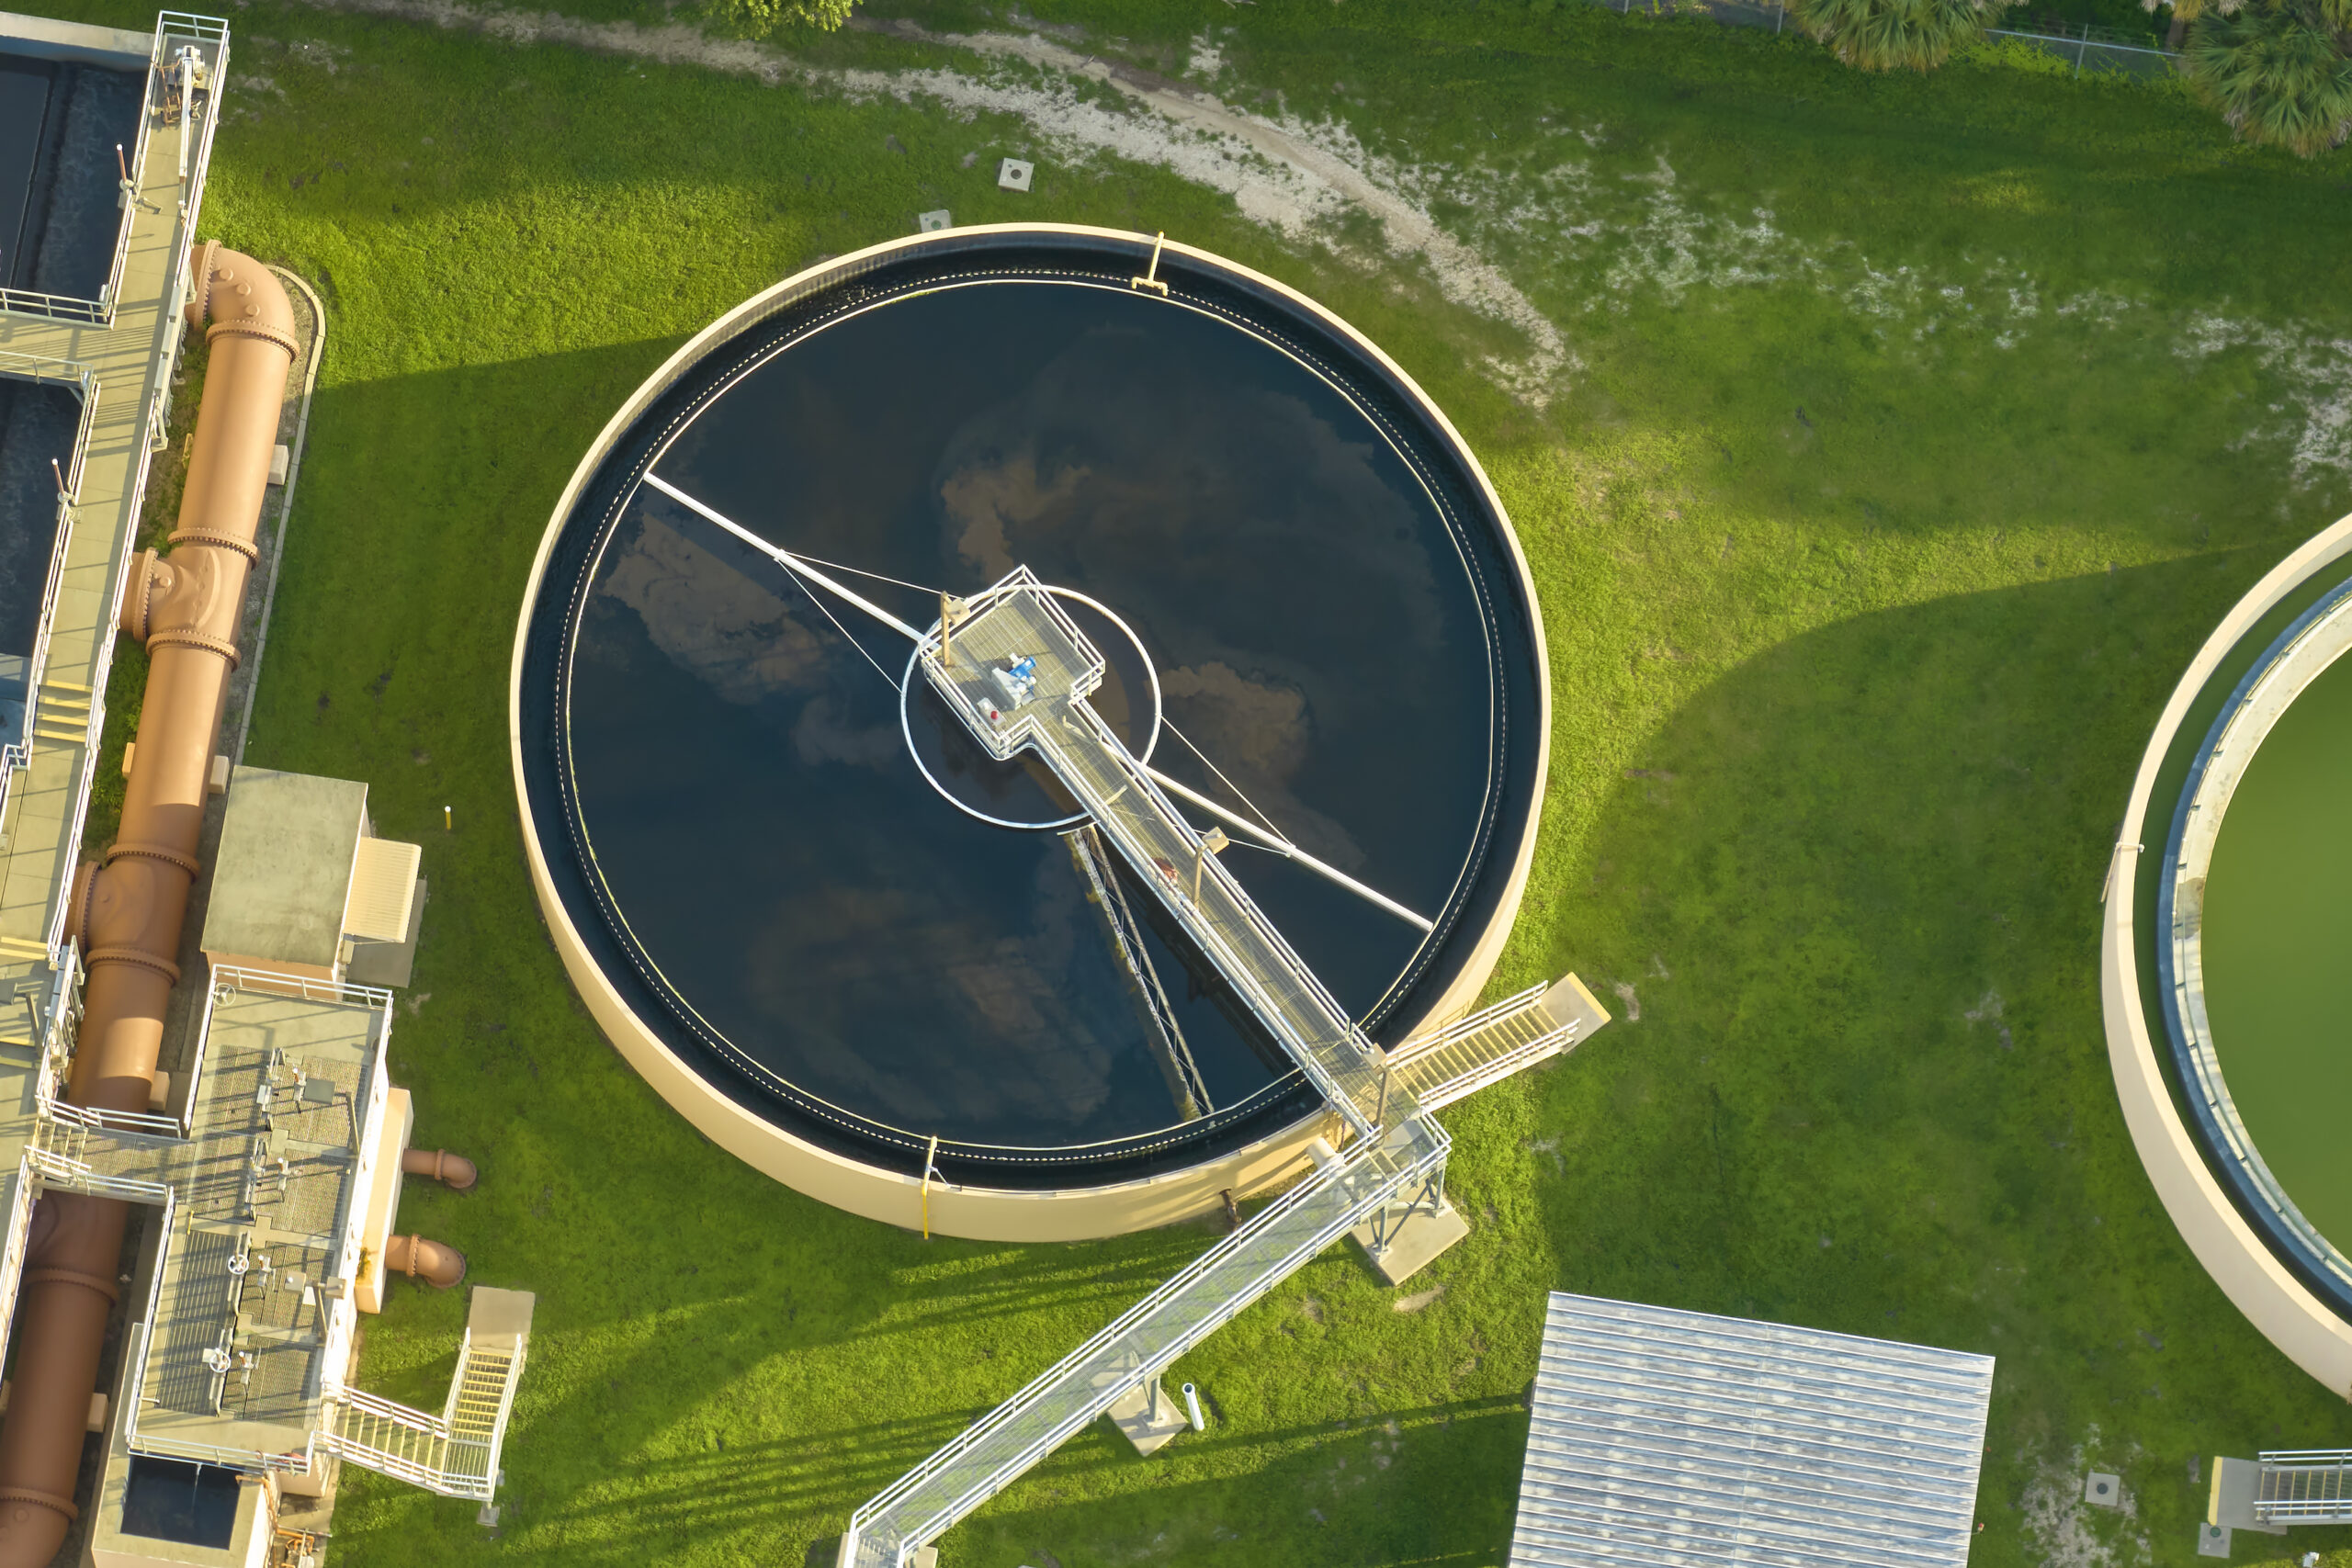 Aerial view of modern water cleaning facility at urban wastewater treatment plant. Purification process of removing undesirable chemicals, suspended solids and gases from contaminated liquid.